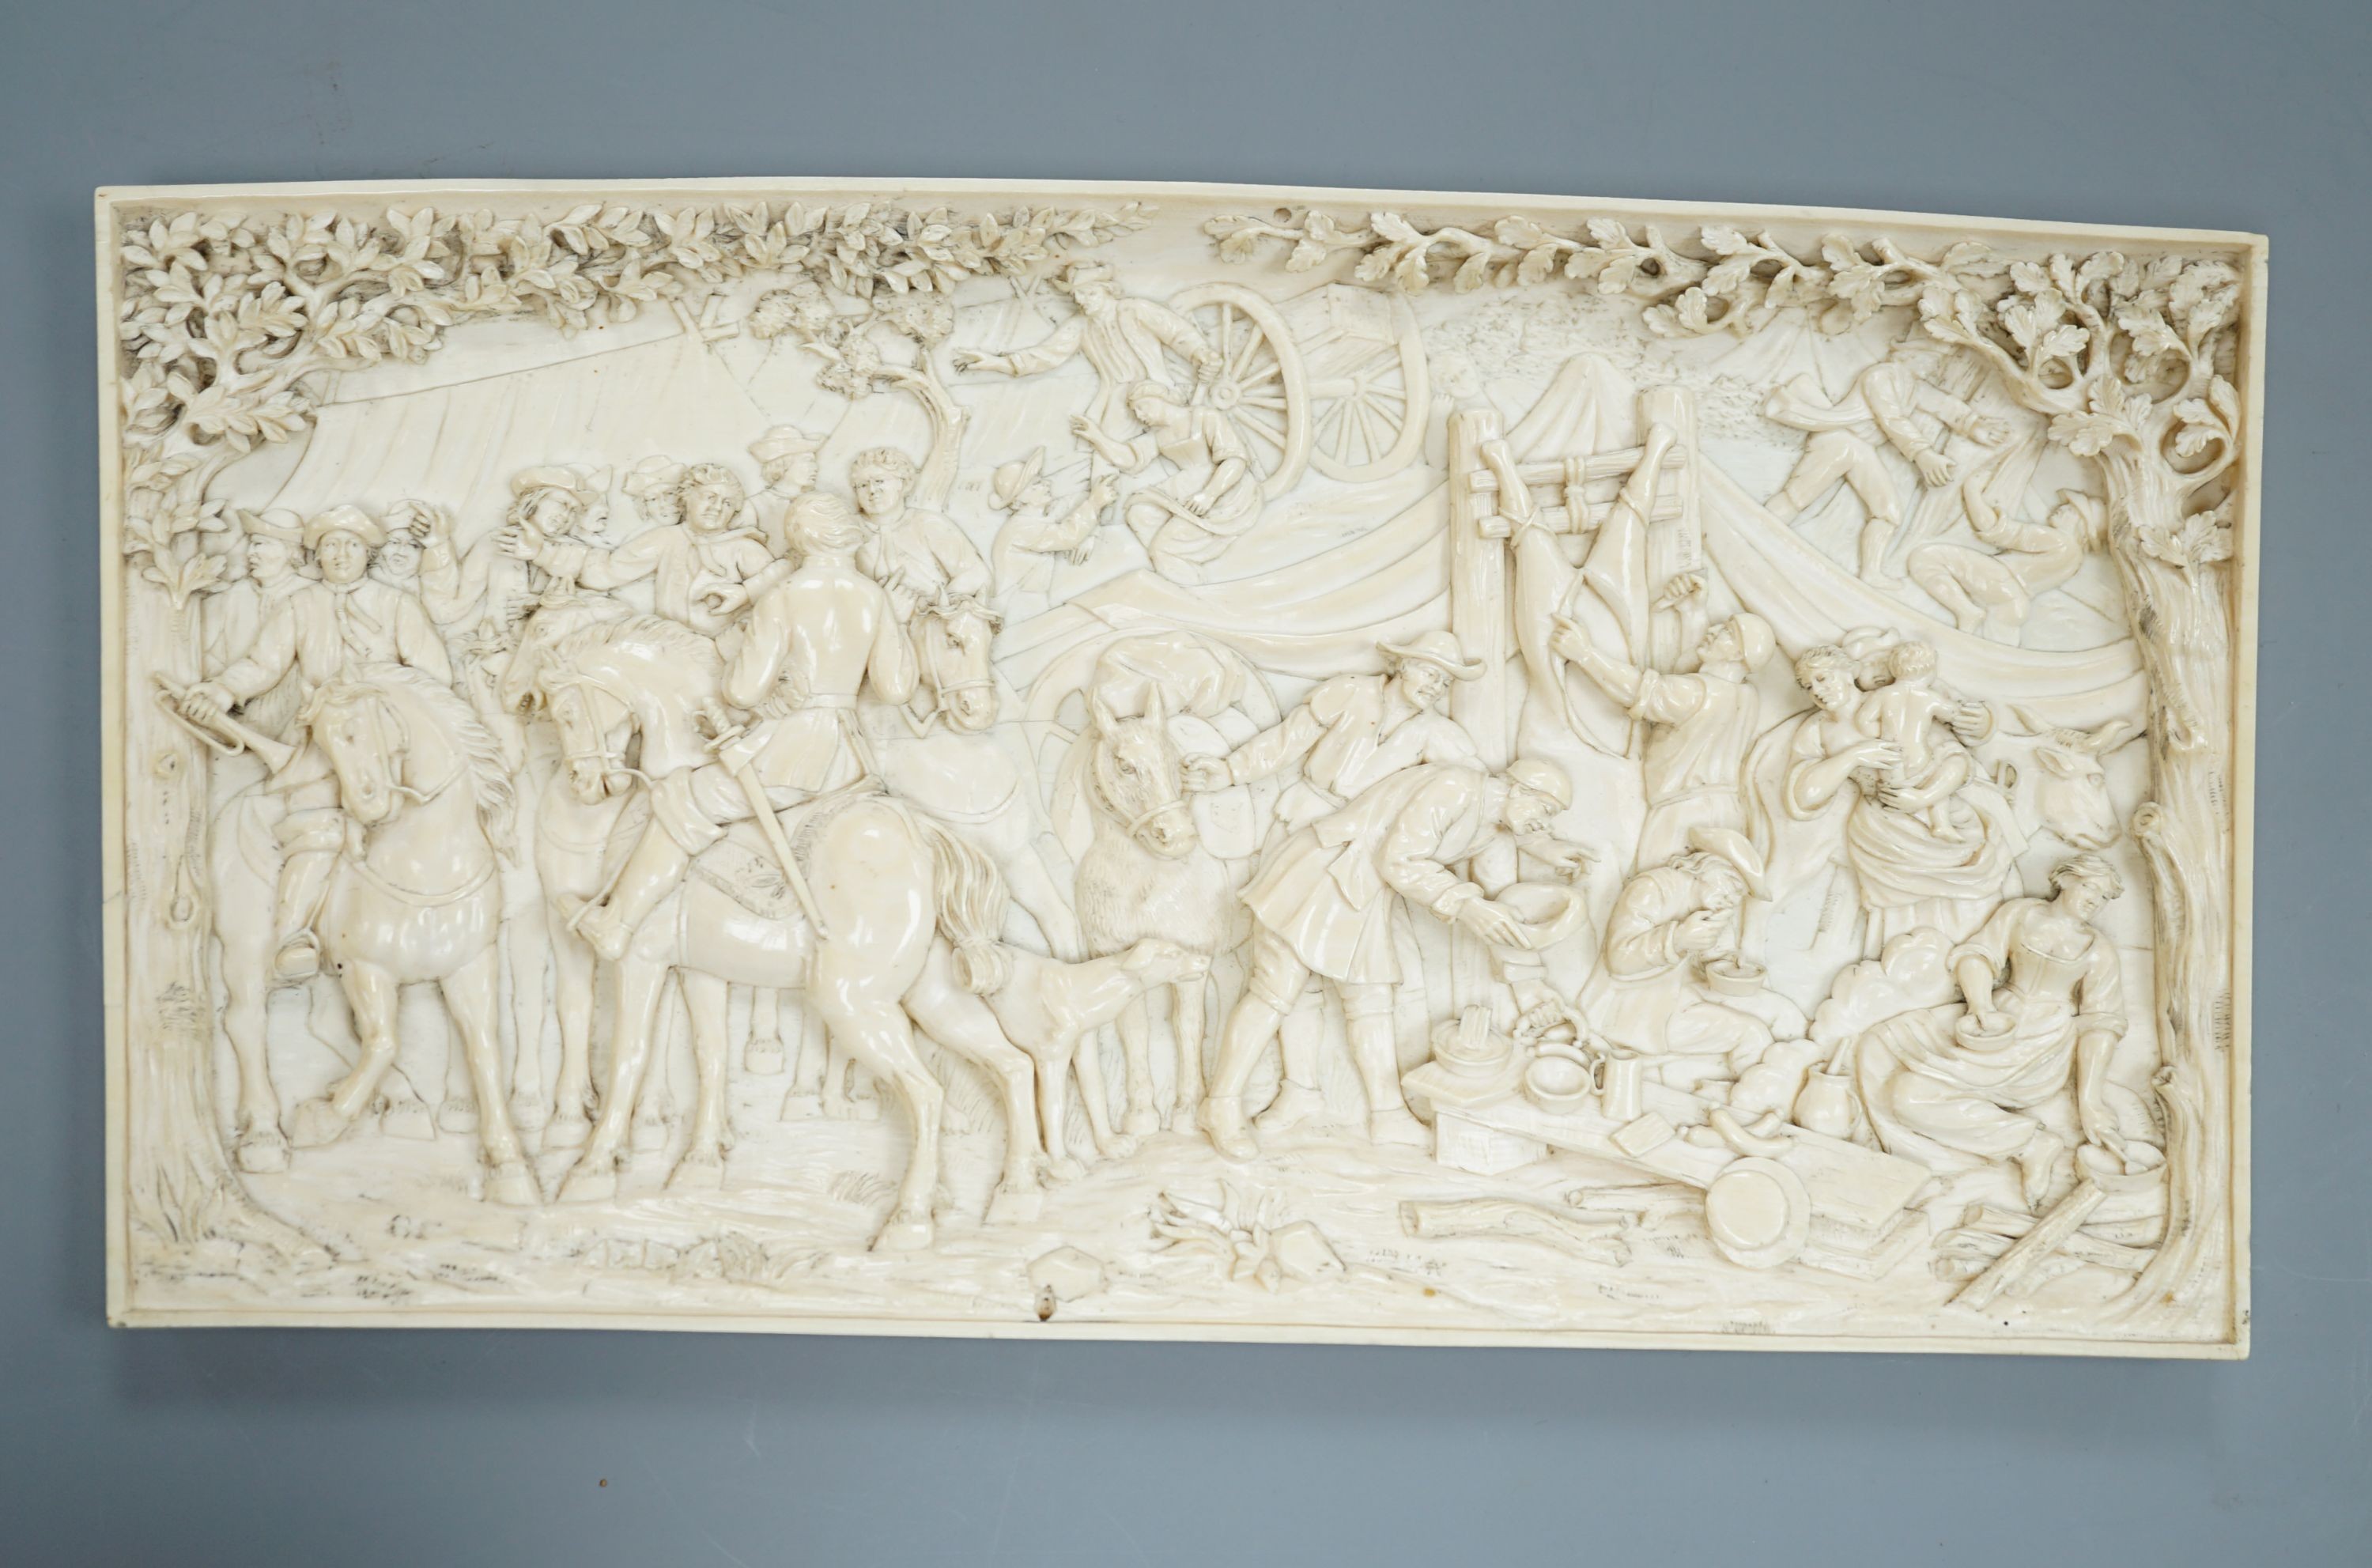 An 18th century Flemish carved ivory plaque (initials OF?) with scenes of hunters and village life, 15 x 28cm